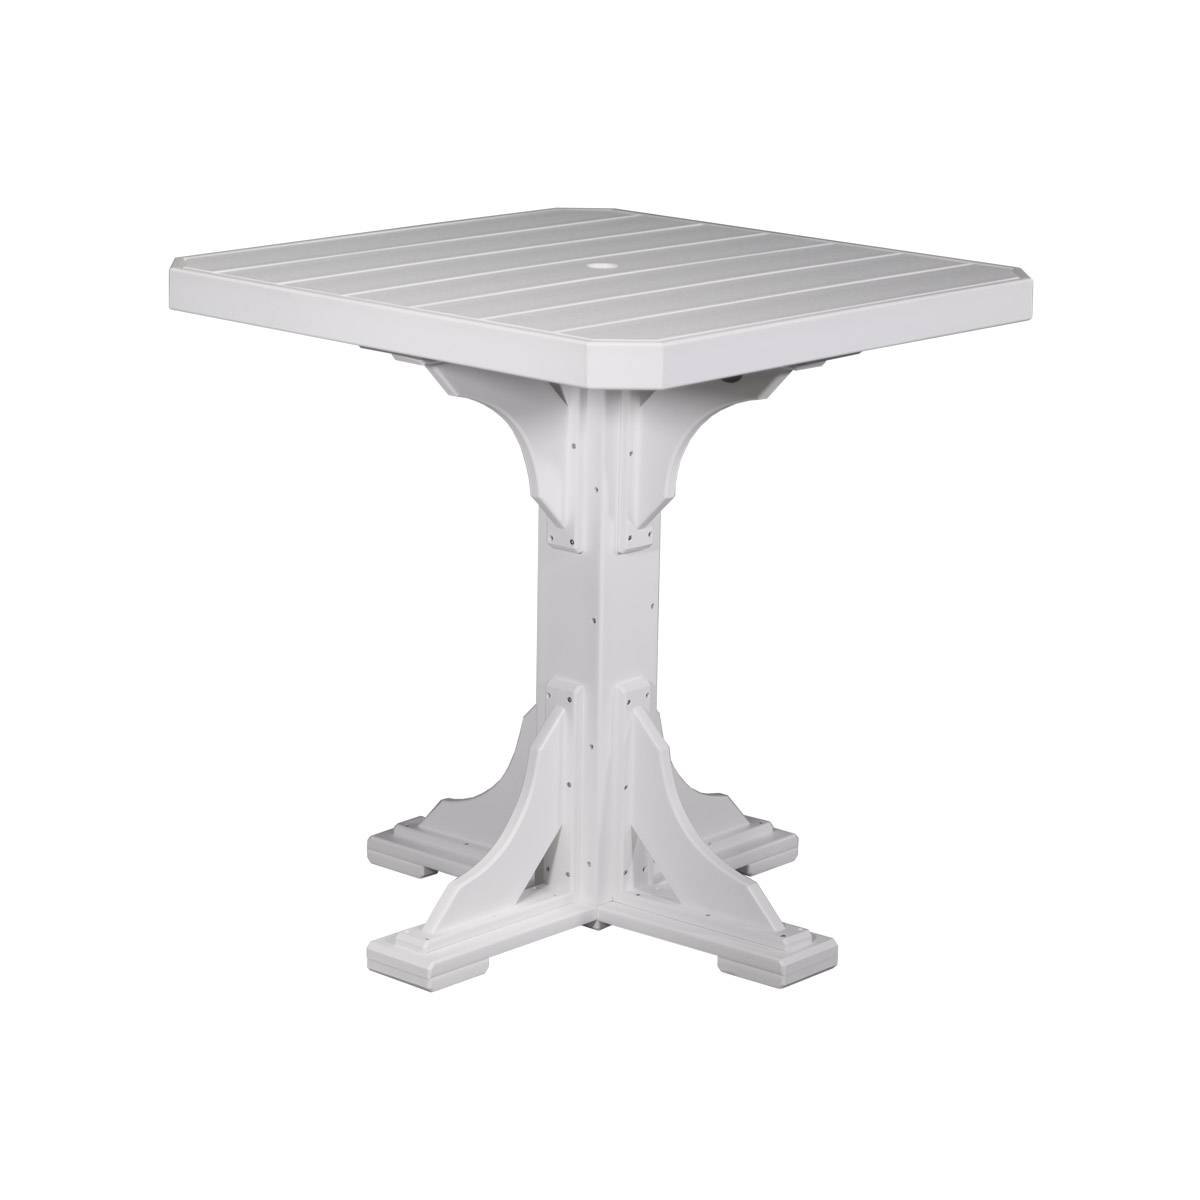 41inch square table